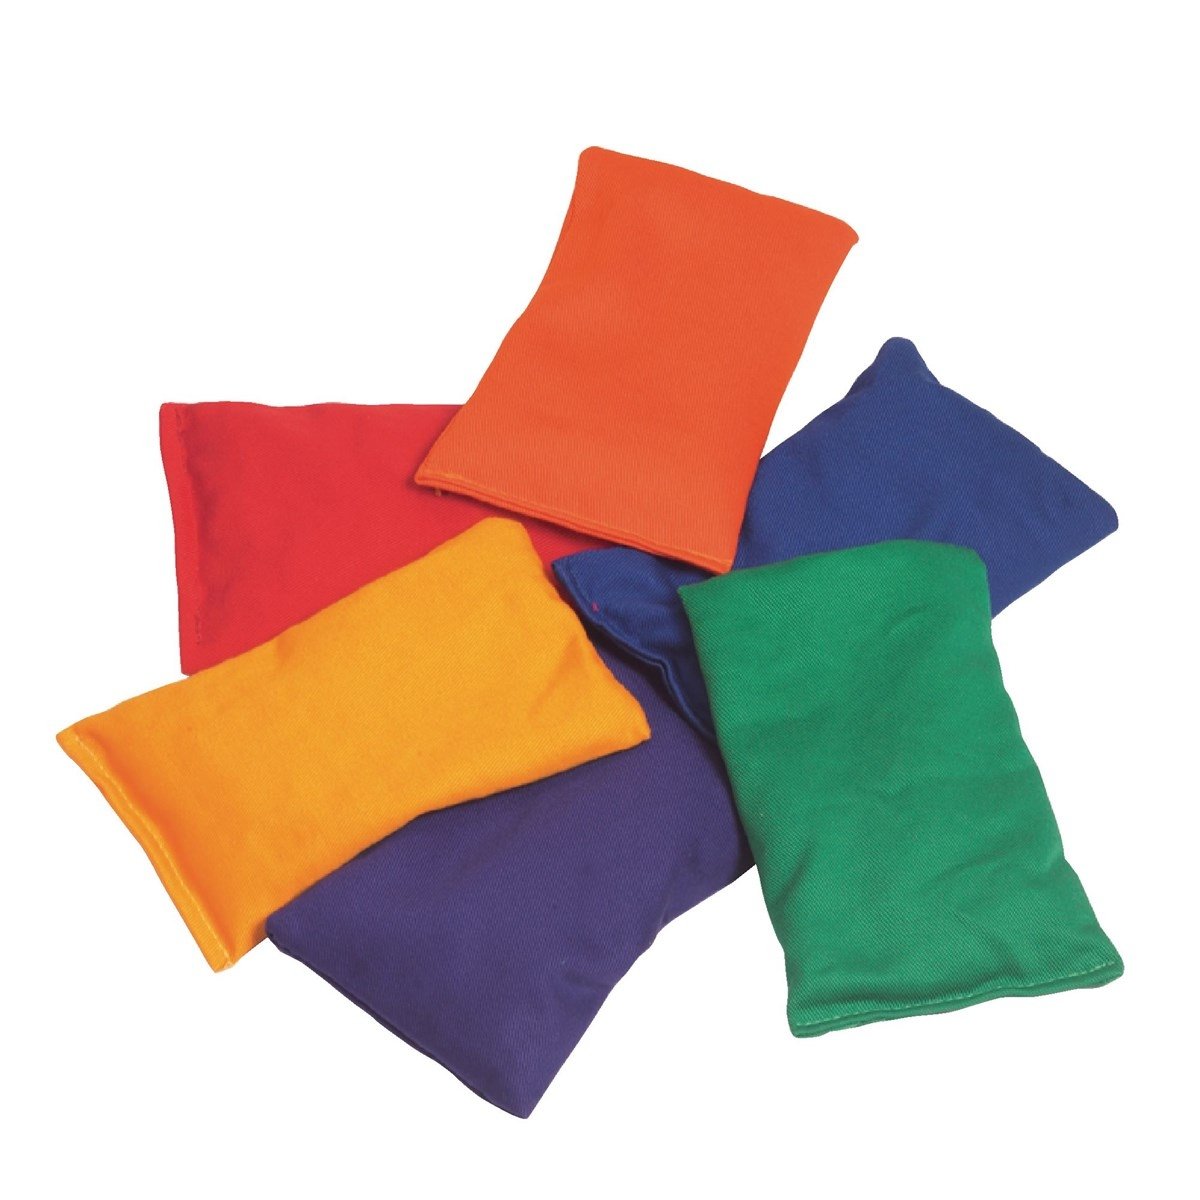 Beanbags Assorted Pack of 18, Brightly coloured beanbags that can be used for an endless variety of games and activities. Made from a soft cotton outer, these beanbags are soft so reduce the fear of catching. Cotton twill outer. Second inner bag for extra safety. Non-toxic filling of foam and plastic grains. Dimensions: 12 x 8cm. Age suitability: 3 years +. Warning!: Not suitable for children under 3 years. Contains small parts. Choking hazard. Learning Outcomes Gross motor skills Co-ordination Sorting skil